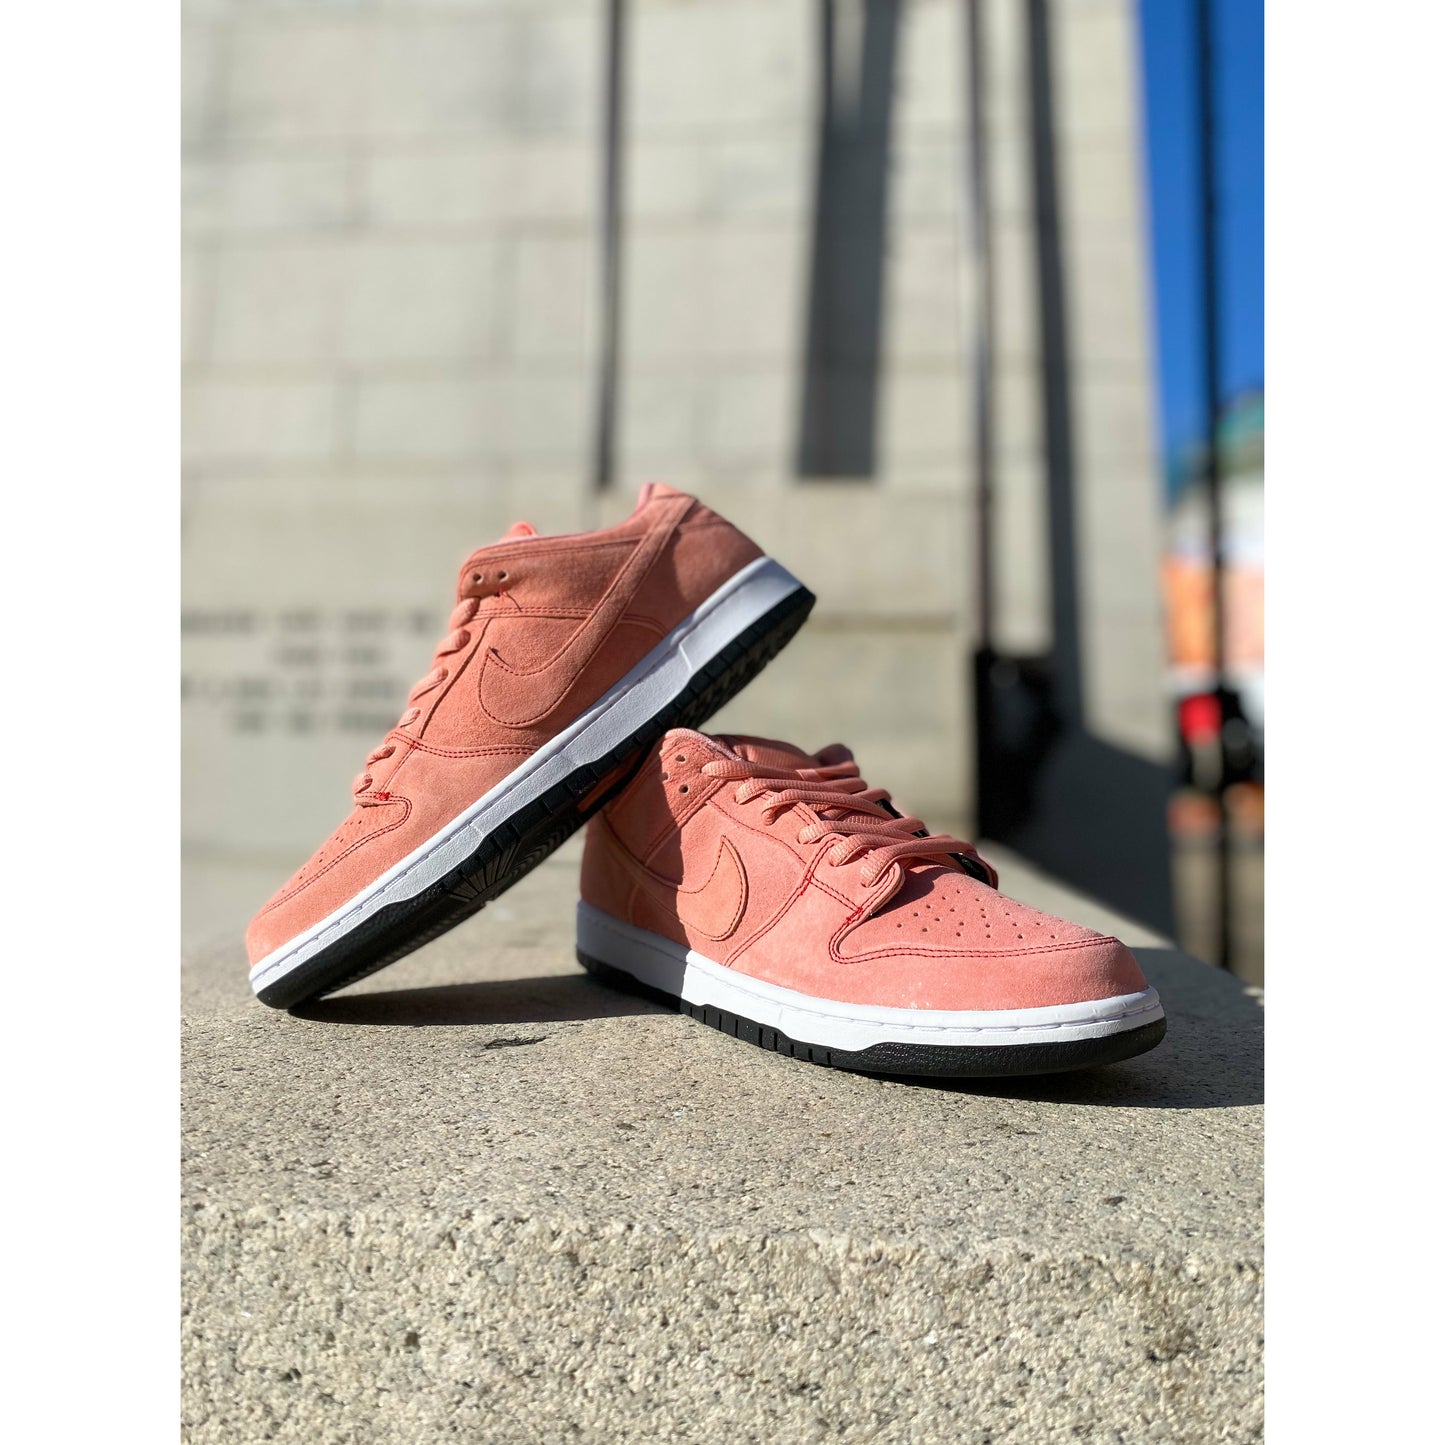 Nike SB Dunk Low Pink Pig from Nike